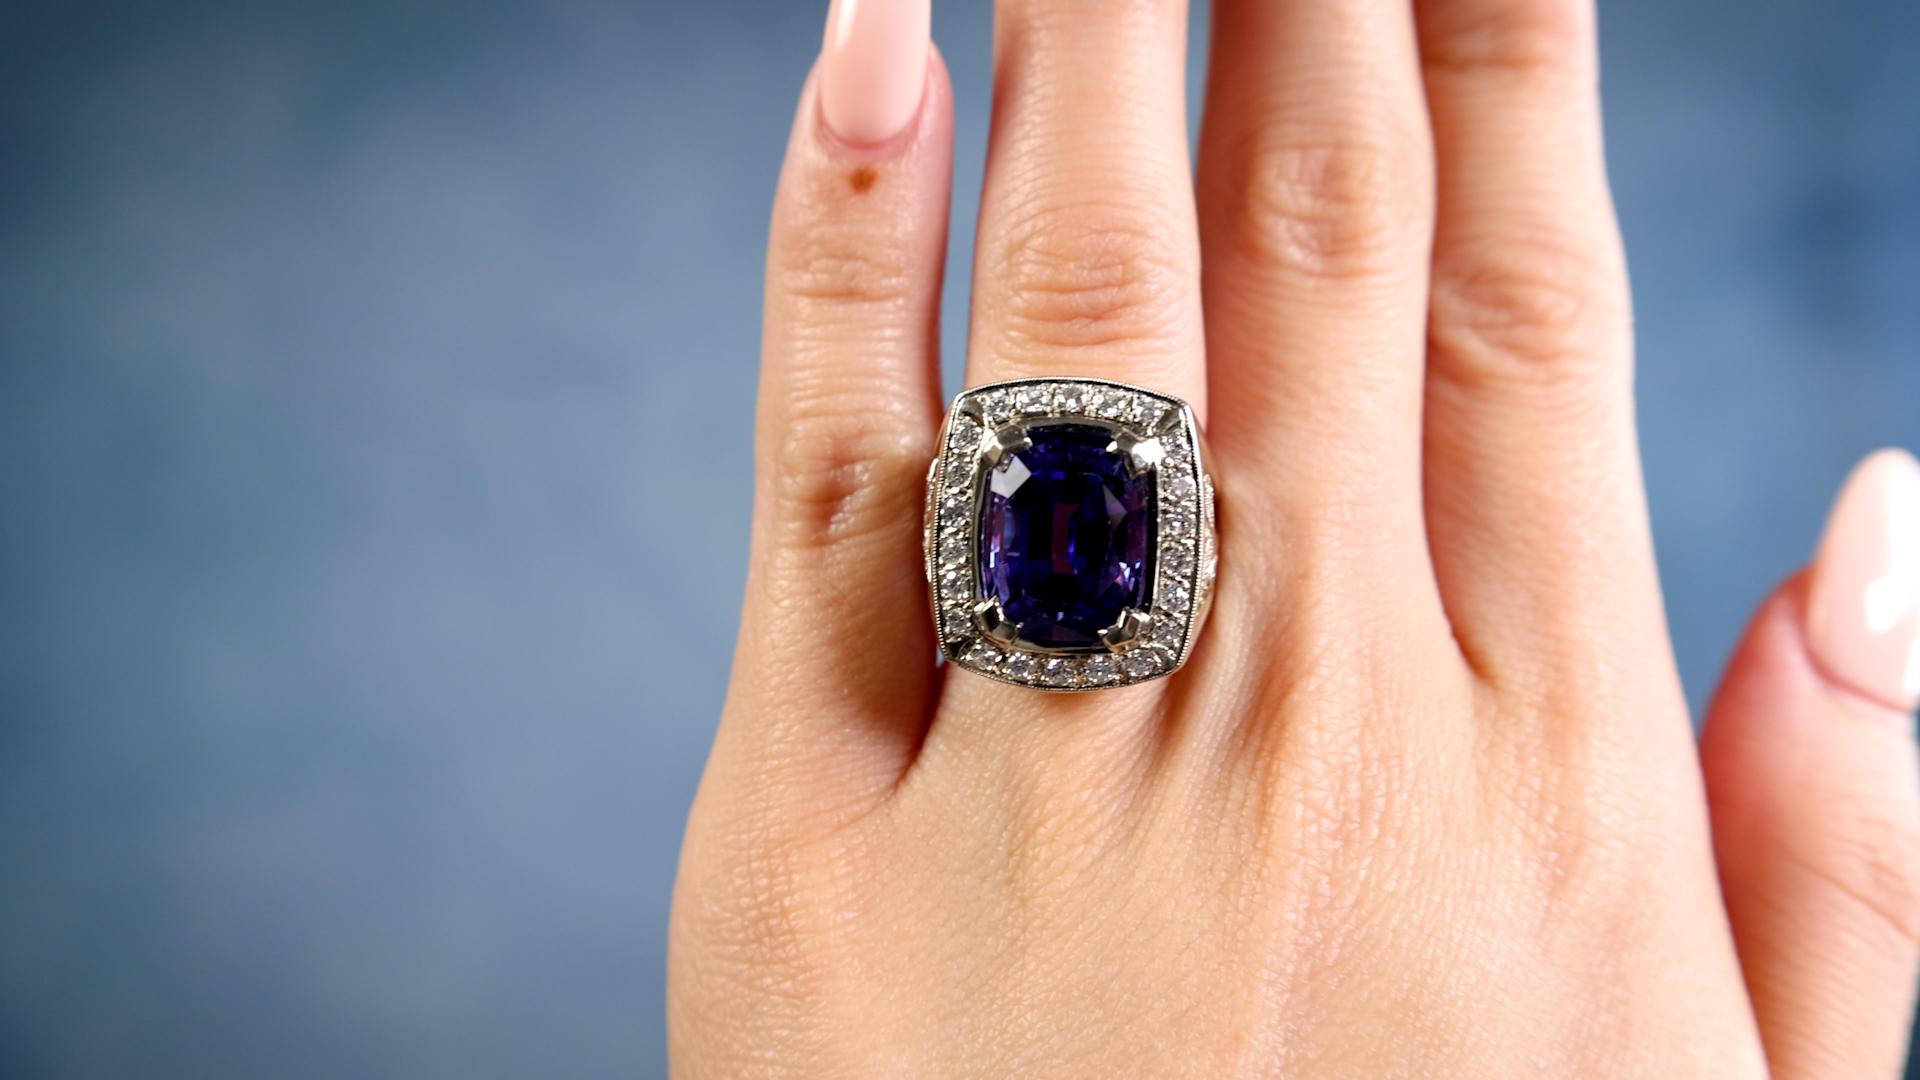 One Vintage Tanzanite Diamond 14k White Gold Ring. Featuring one cushion mixed cut tanzanite weighing approximately 8.50 carats. Accented by 32 round brilliant cut diamonds with a total weight of approximately 1.15 carats, graded F-G color, VS